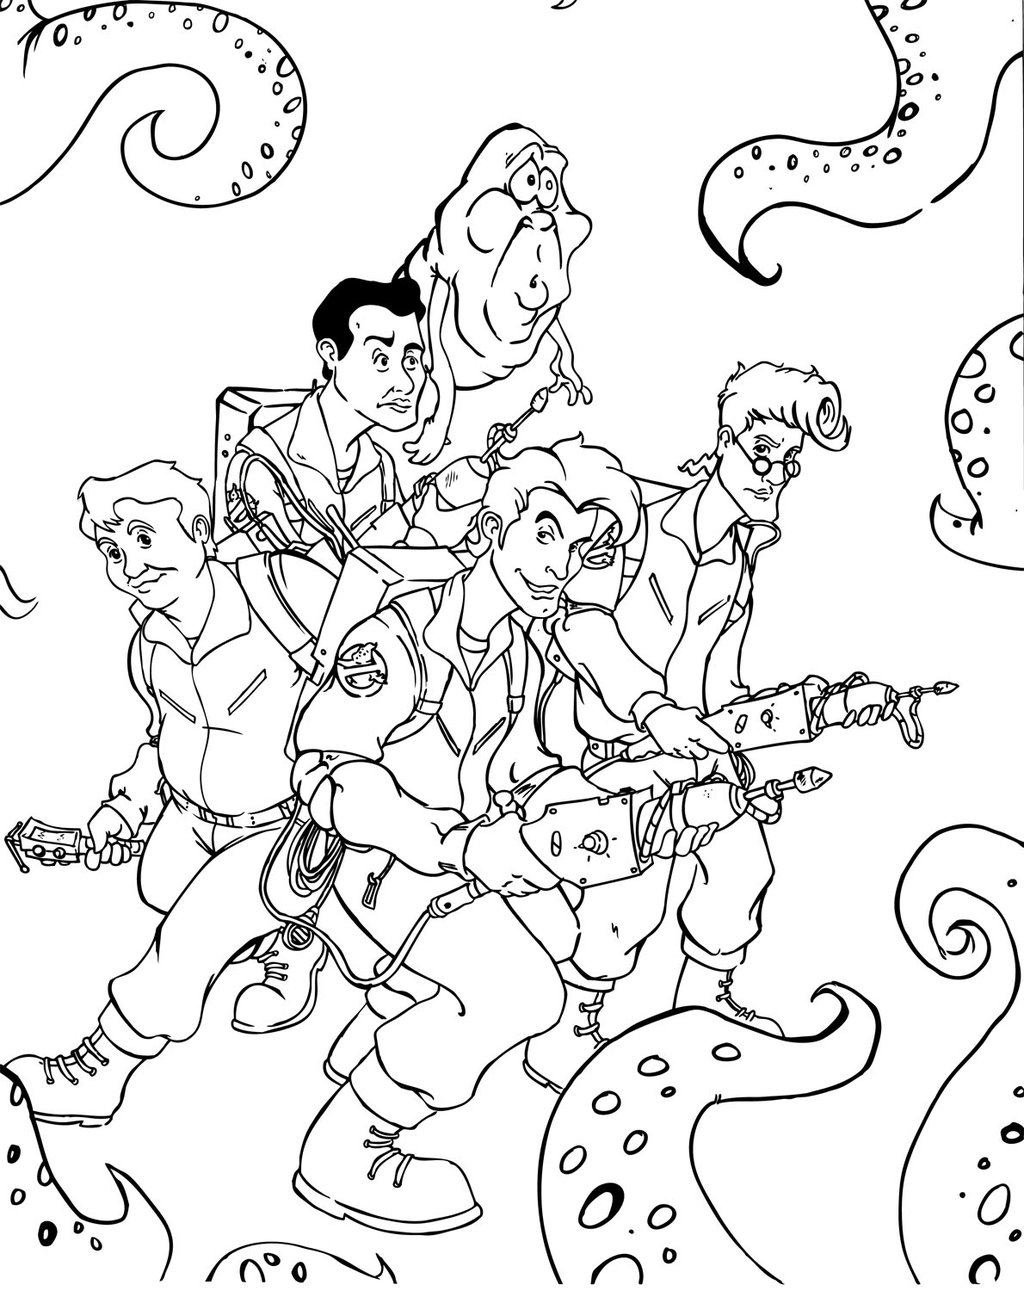 Coloring page: Ghostbusters (Movies) #134012 - Printable coloring pages